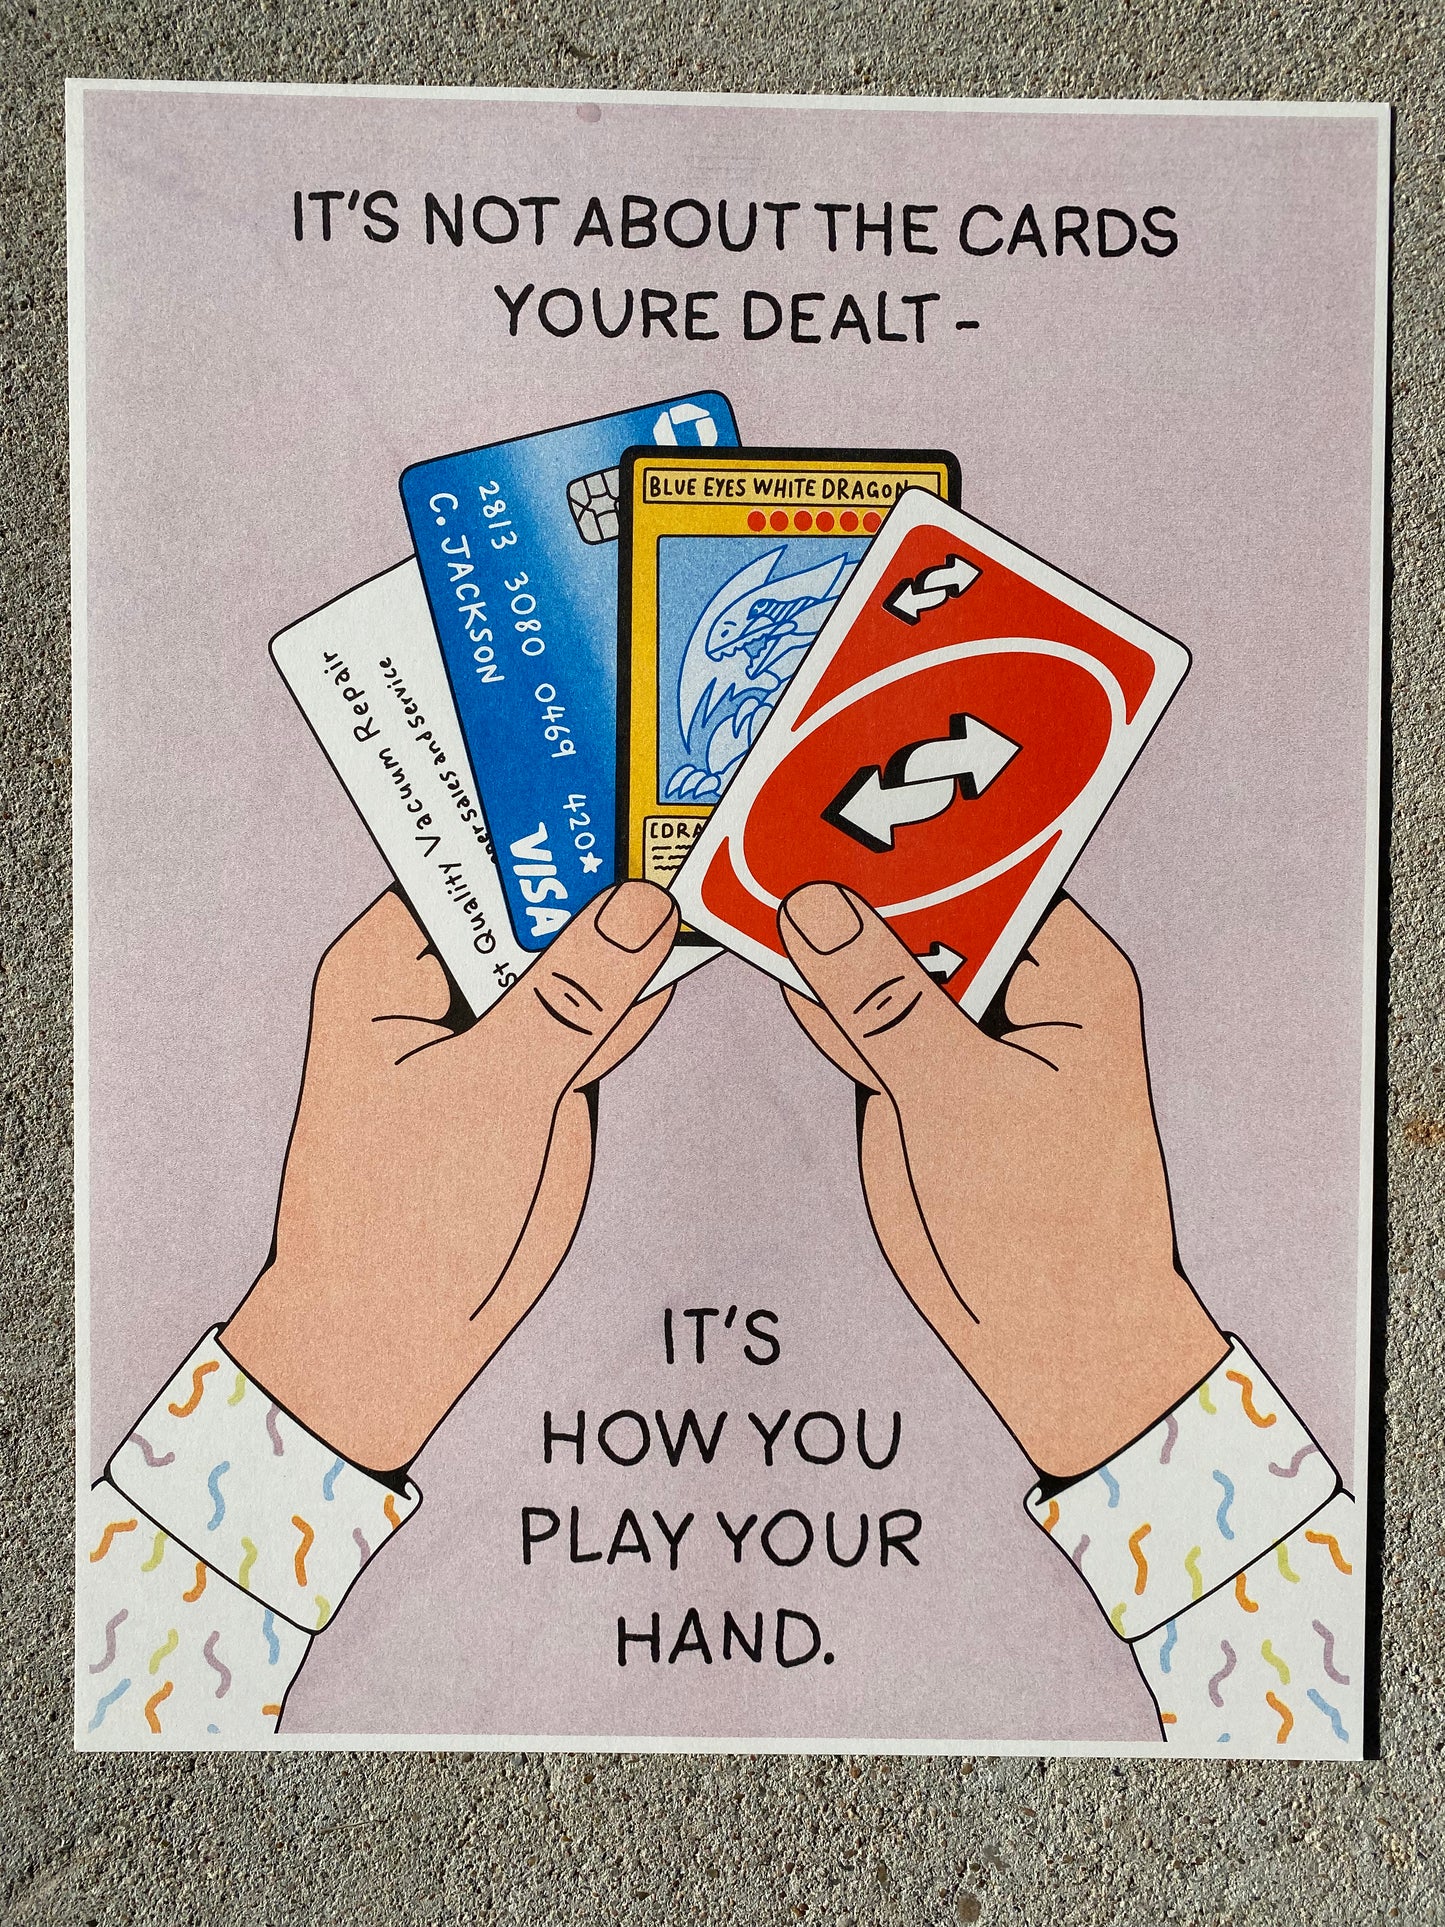 A poster with a light purple background and 2 cartoon hands holding 4 cards - a business card, a credit card and 2 game cards.  The sleeves are white with a multi-colored design that looks like small worms.  The top of the poster reads "It's Not About the Cards You're Dealt - It's How you Play Your Hand".